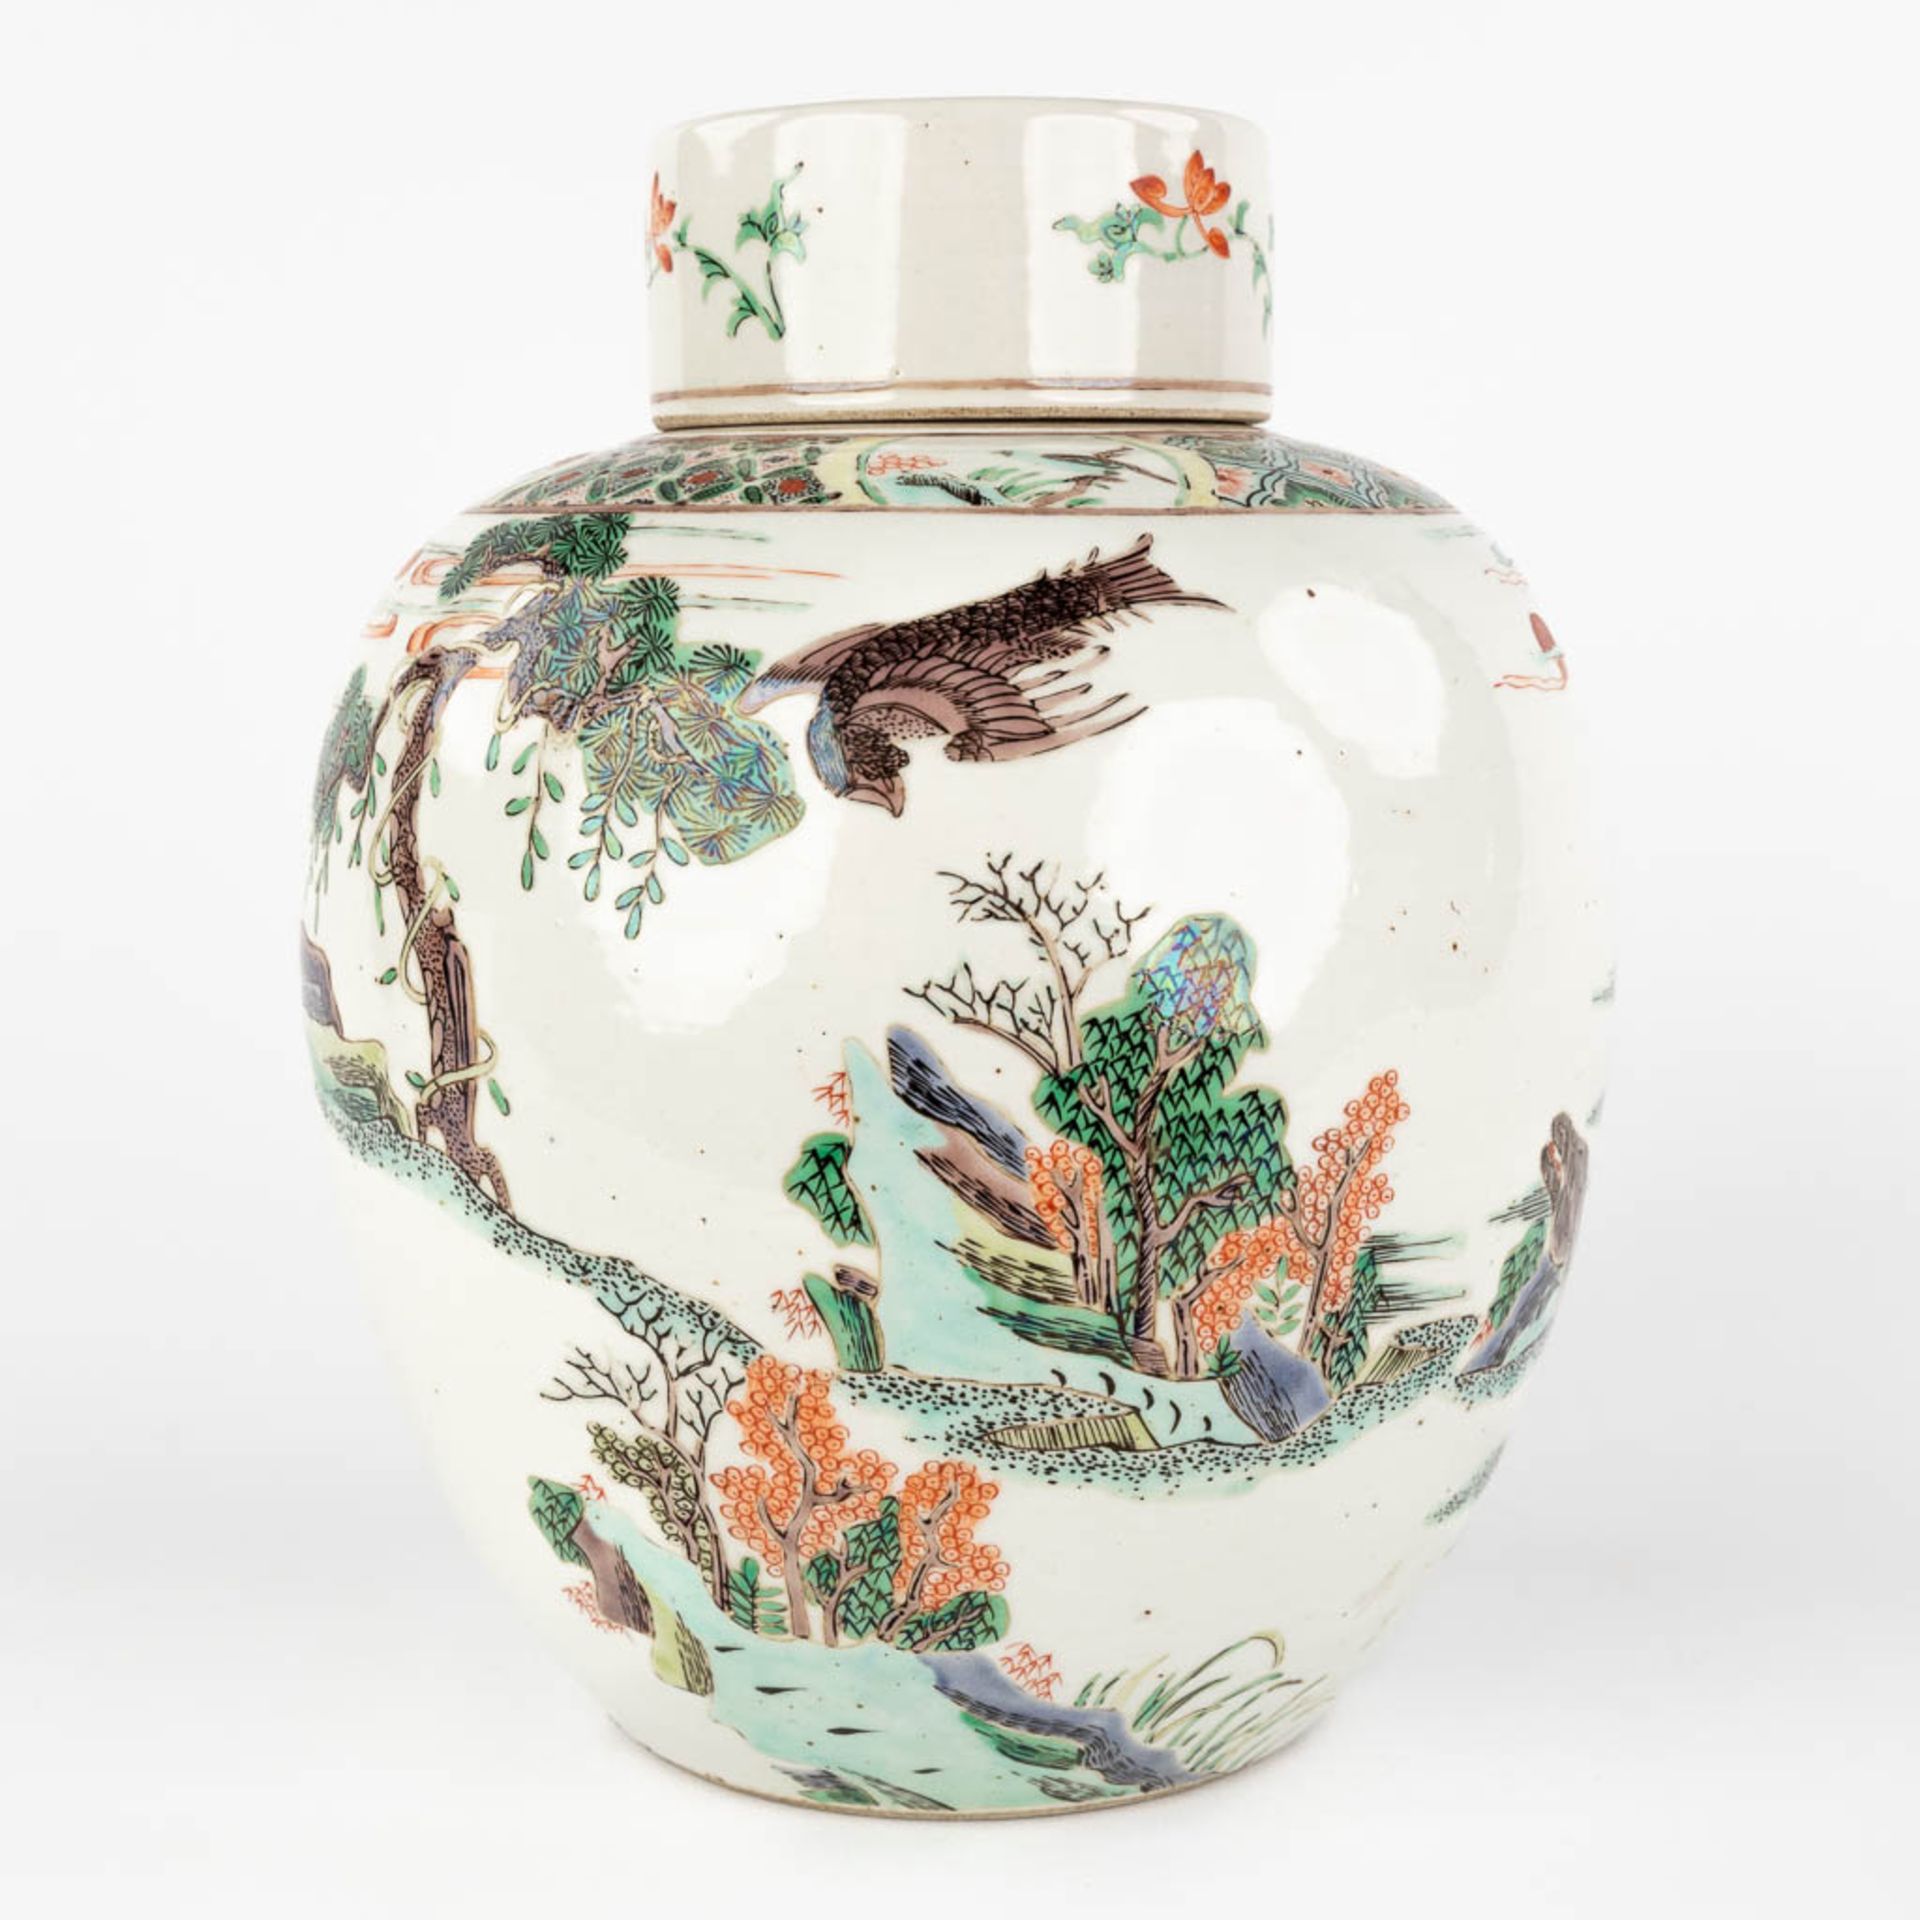 A Chinese Famille Verte Wucai vase, decorated with a deer in a landscape. (H:24,5 x D:19,5 cm) - Image 7 of 14